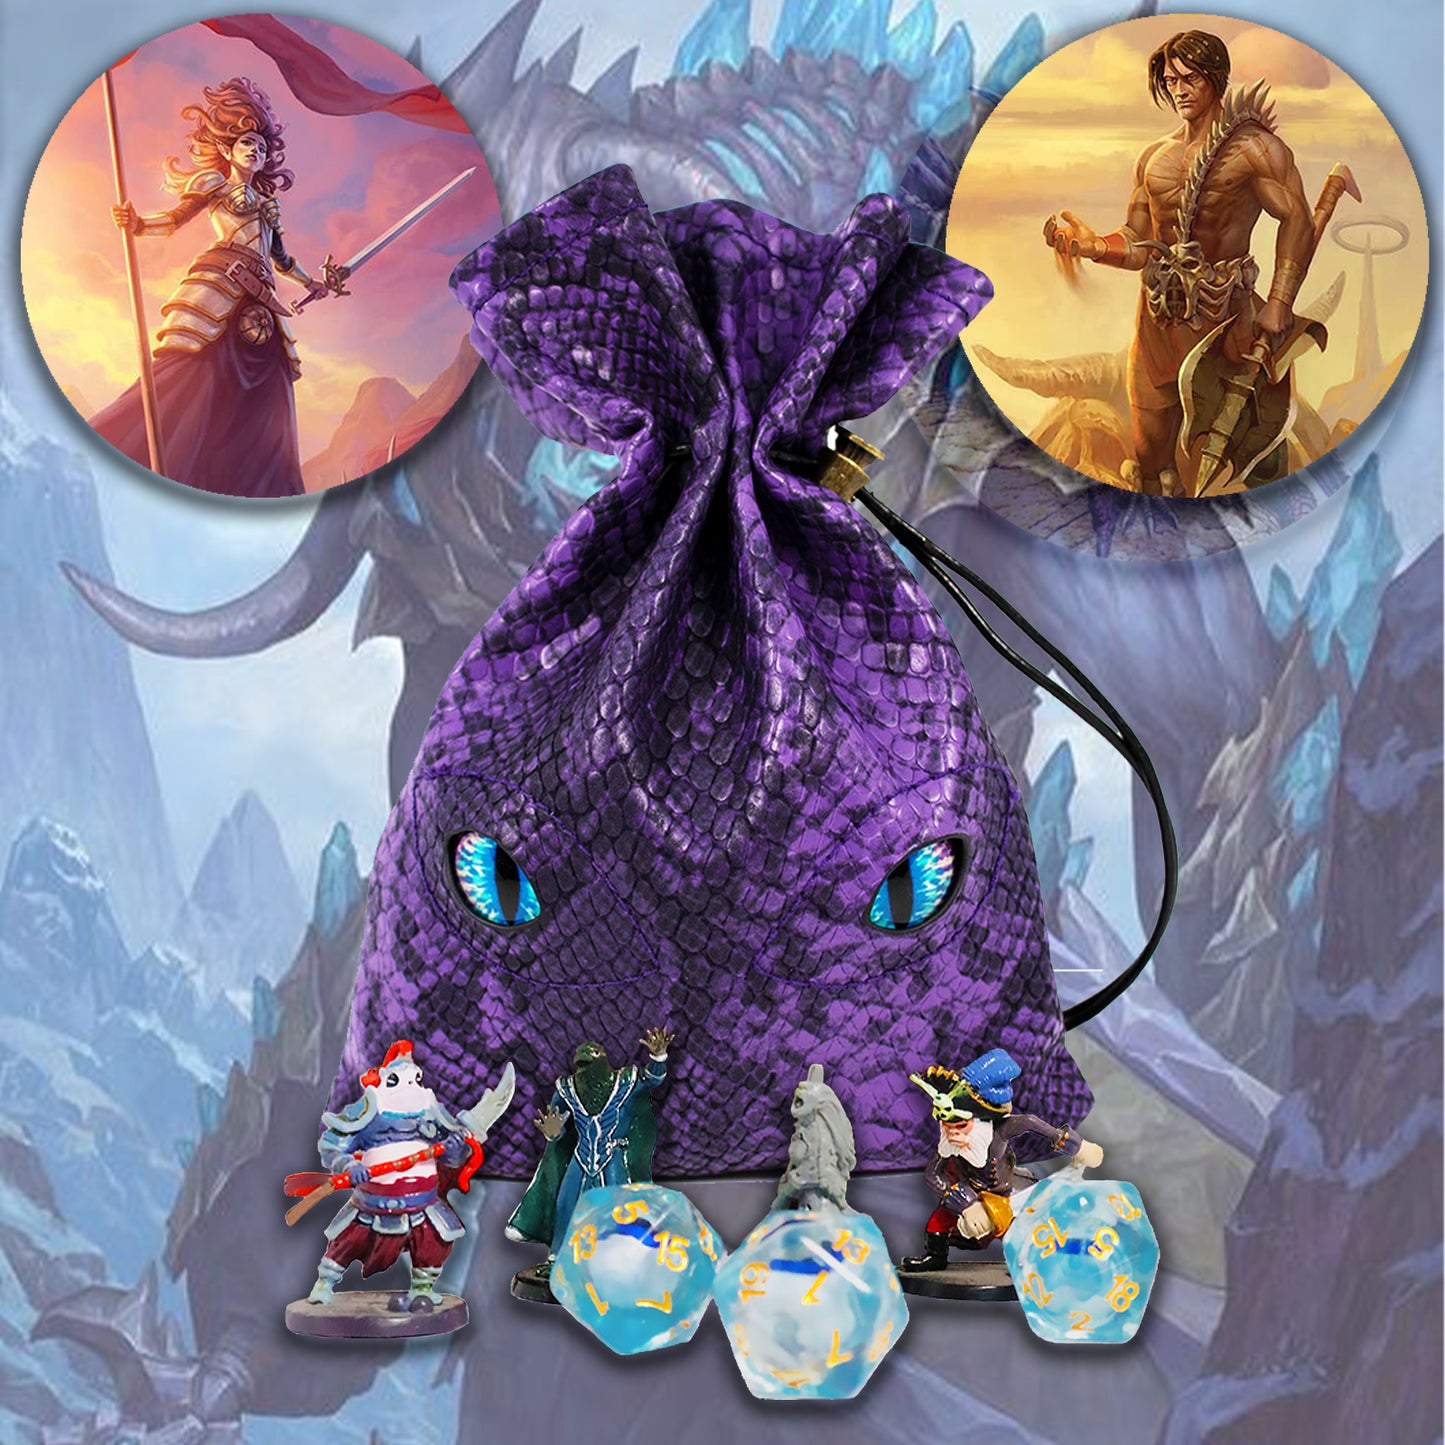 Byhoo DND Dice Bag Can Cover 6 Dice Sets, Glow in The Dark Eyes D and D Dice Storage Pouch, Purple Dragon Leather Coins Bag for Fantasy Dragons and Dungeons Games Accessories, Drawstring Dice Pouch